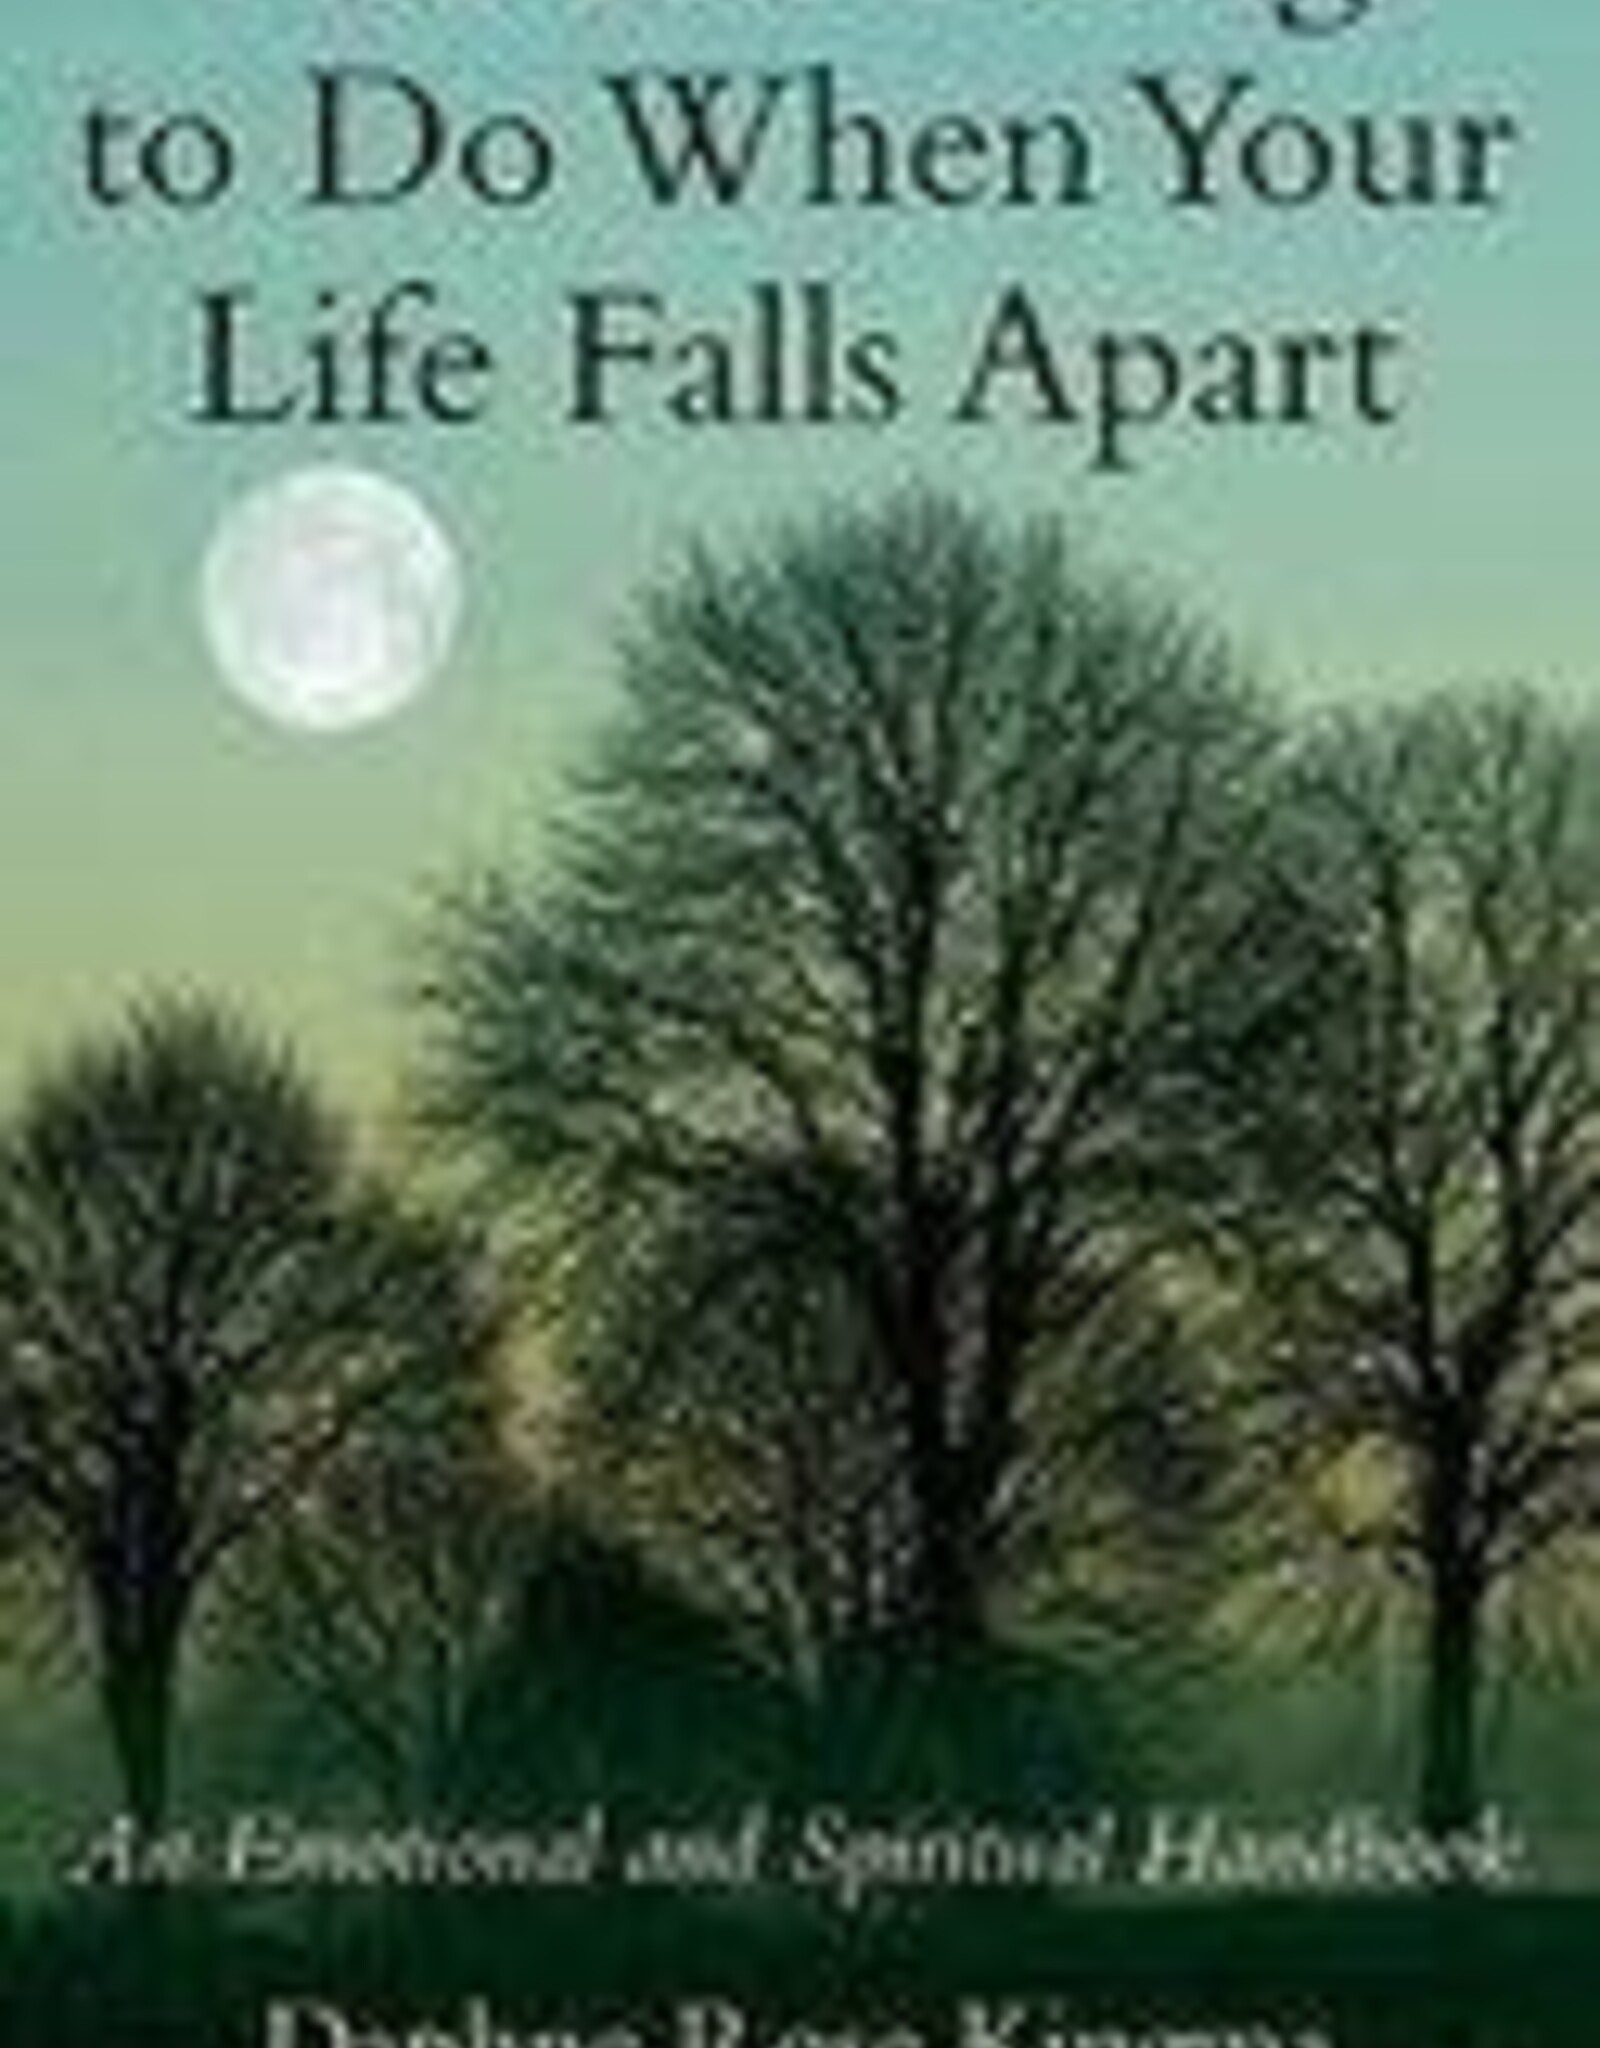 Ten Things to Do When Your Life Falls Apart